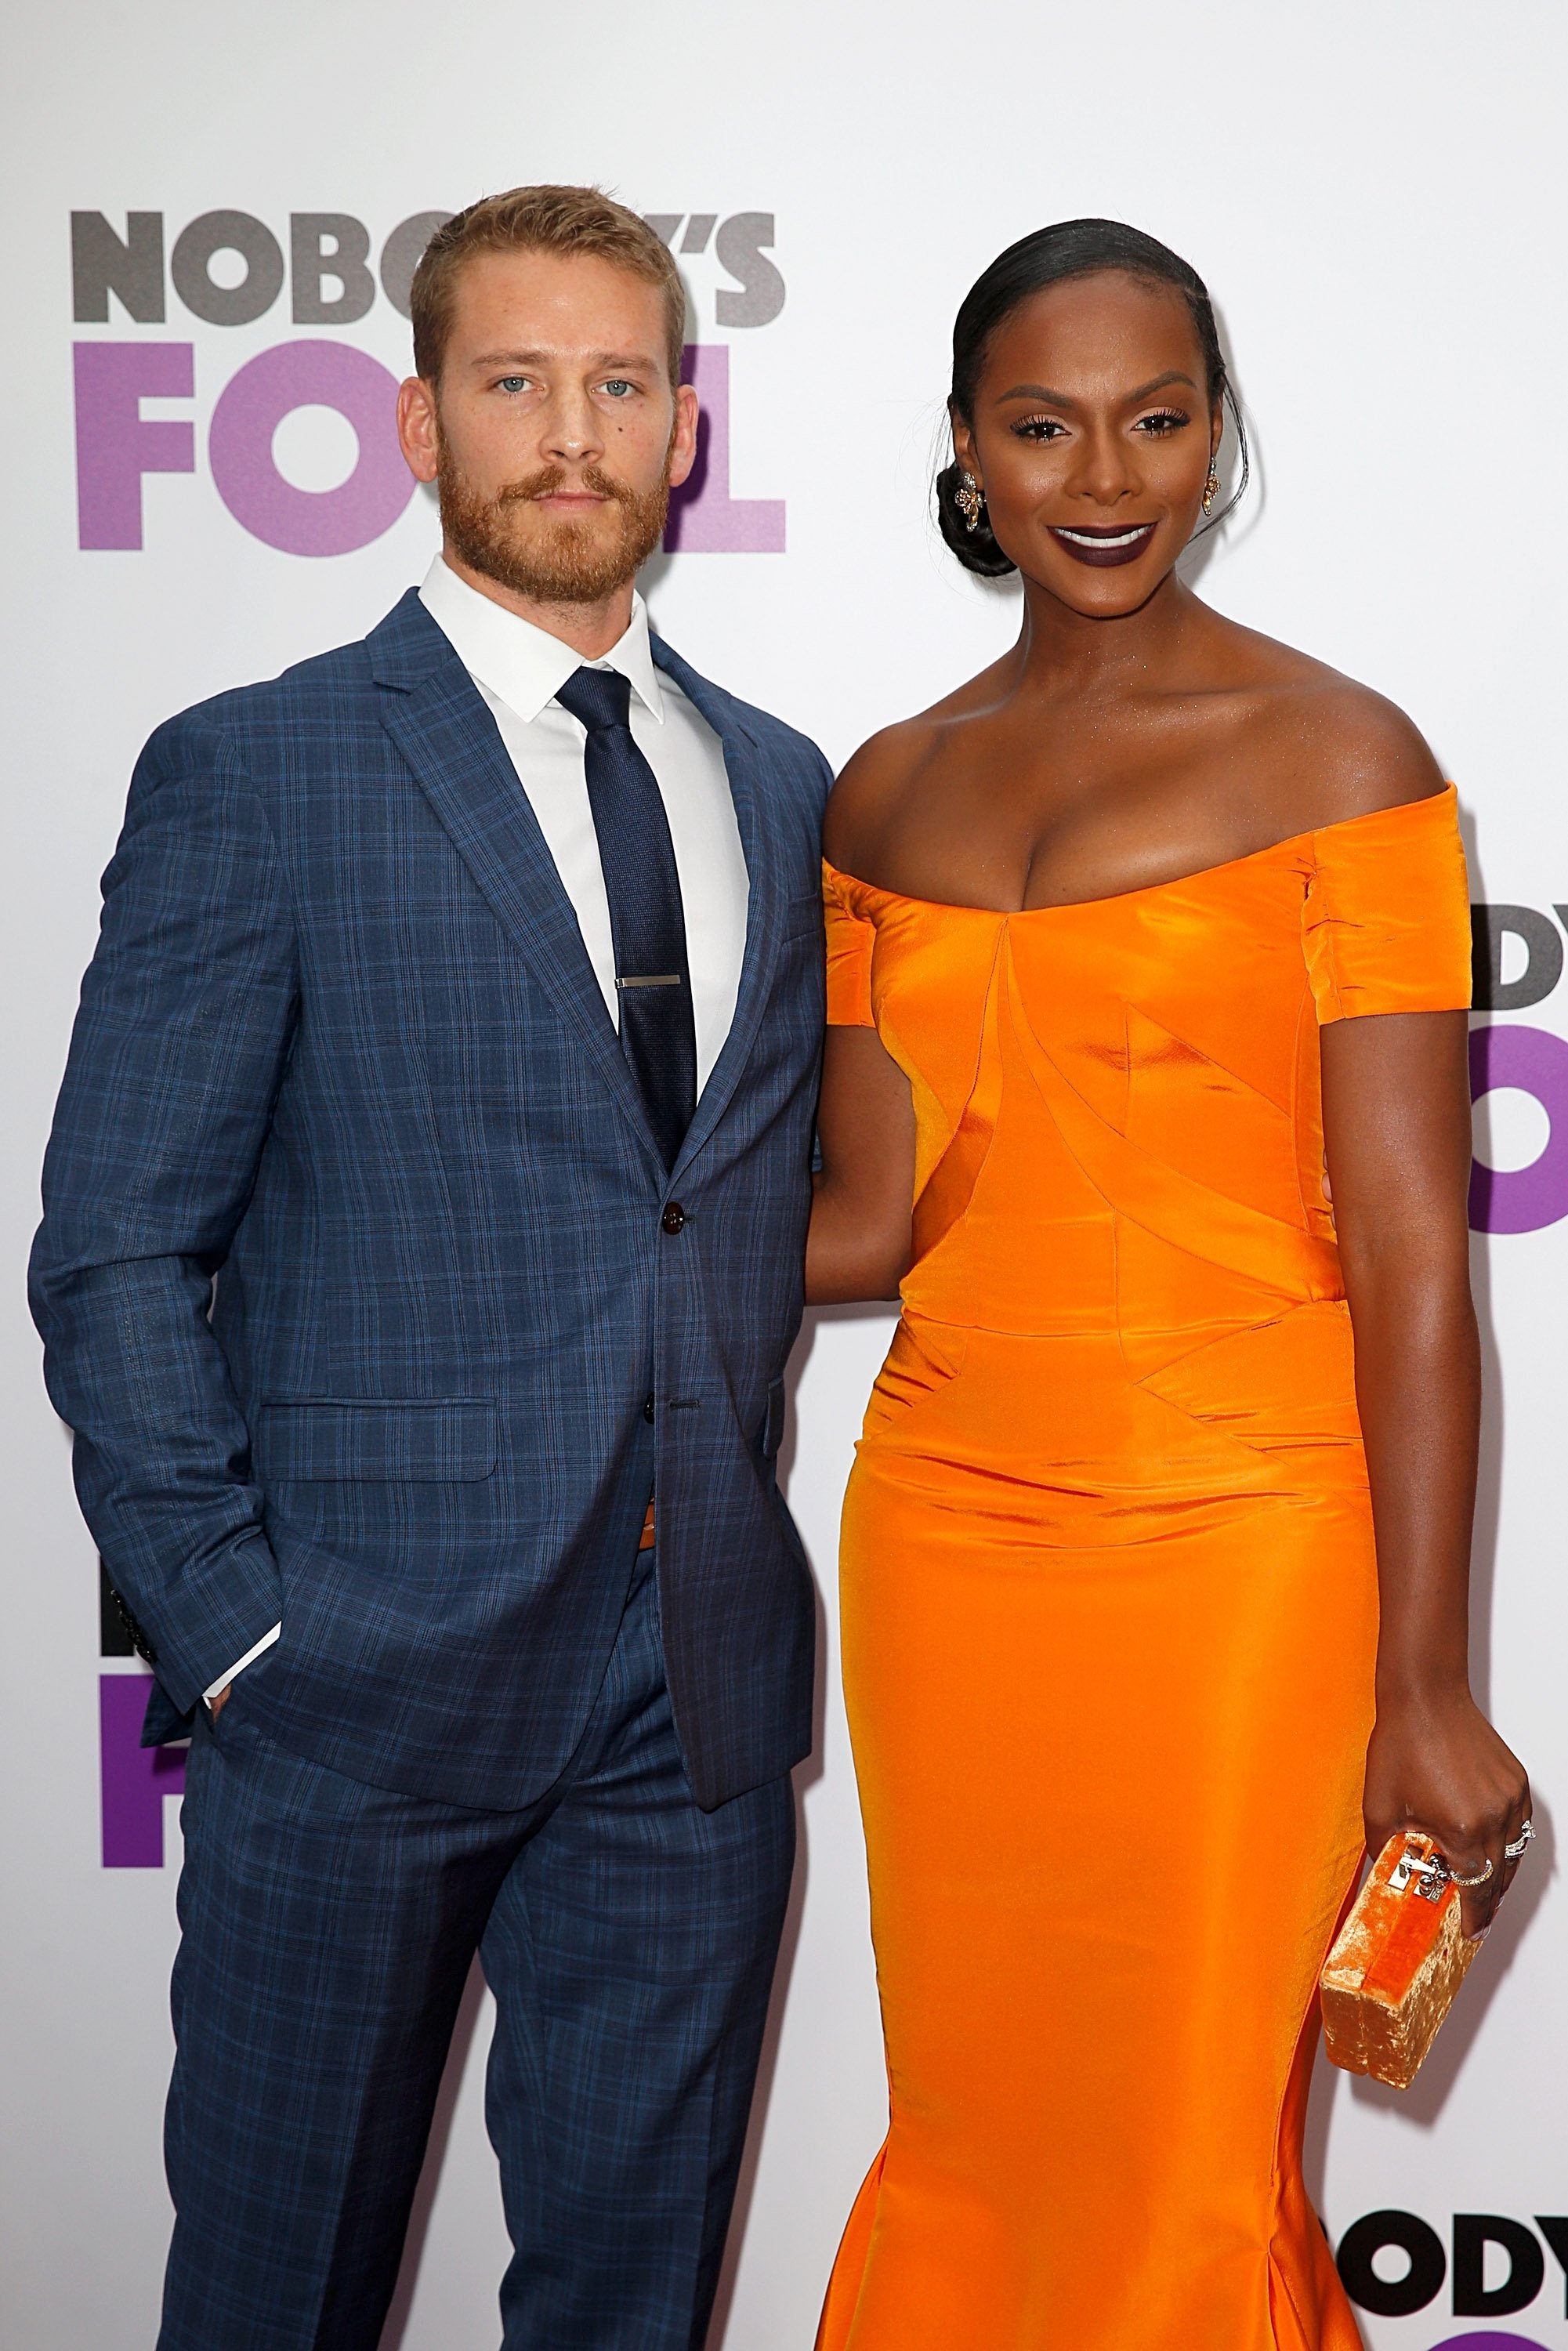 Nicholas James & Tika Sumpter at the Premiere of 'Nobody's Fool' on Oct. 28, 2018 in New York City | Photo: Getty Images